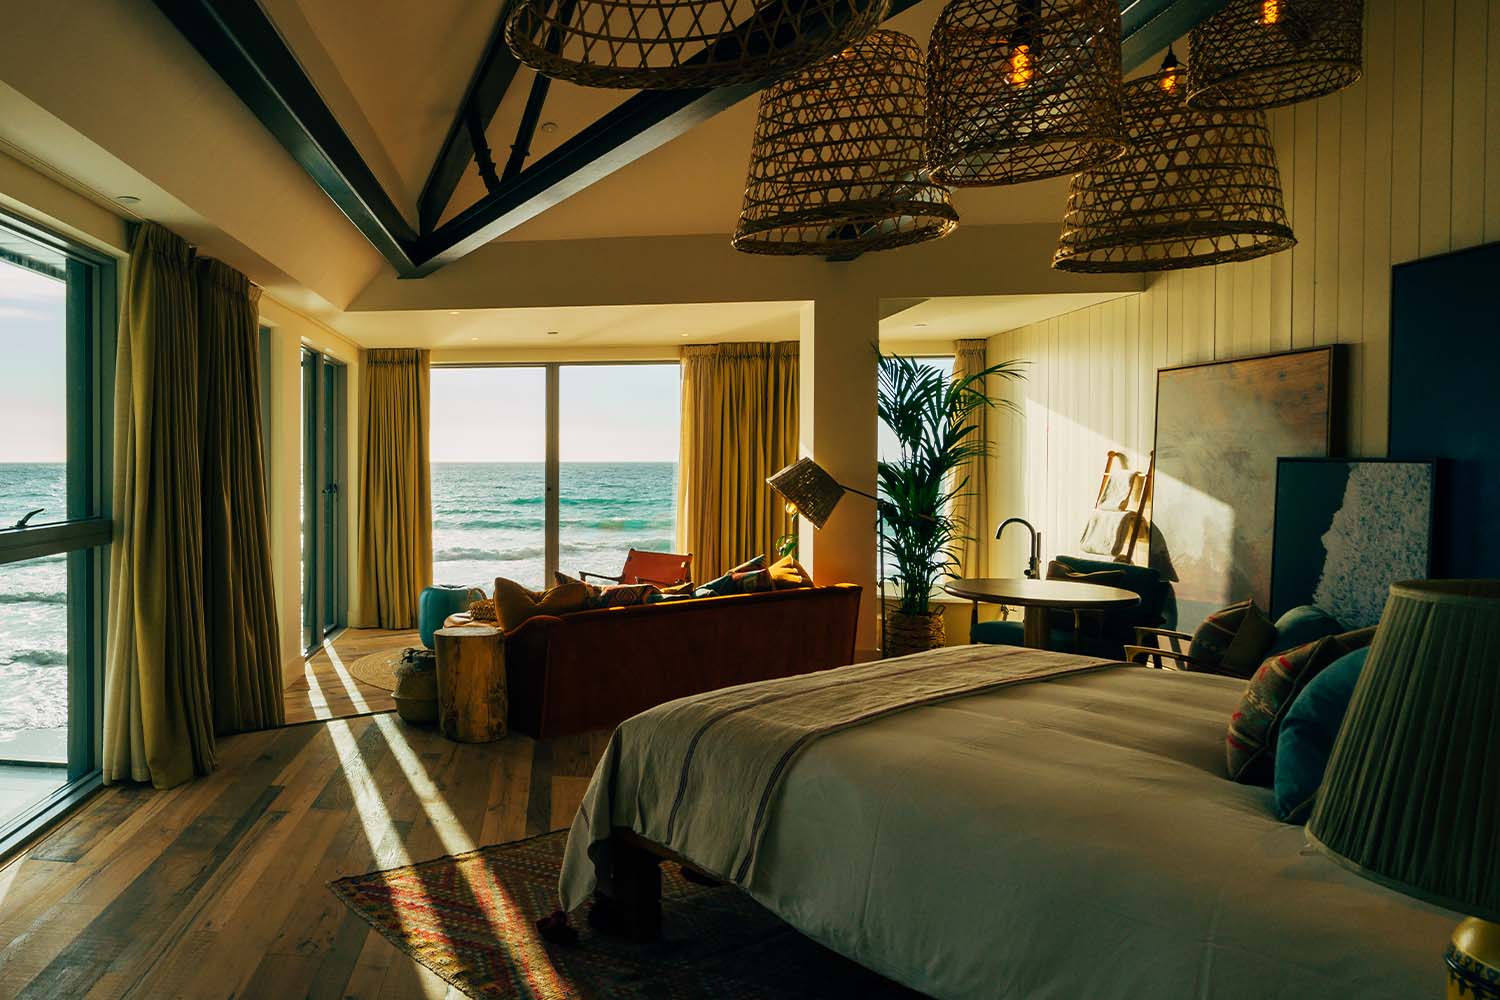 A Beach Loft Suite at the Watergate Bay Hotel